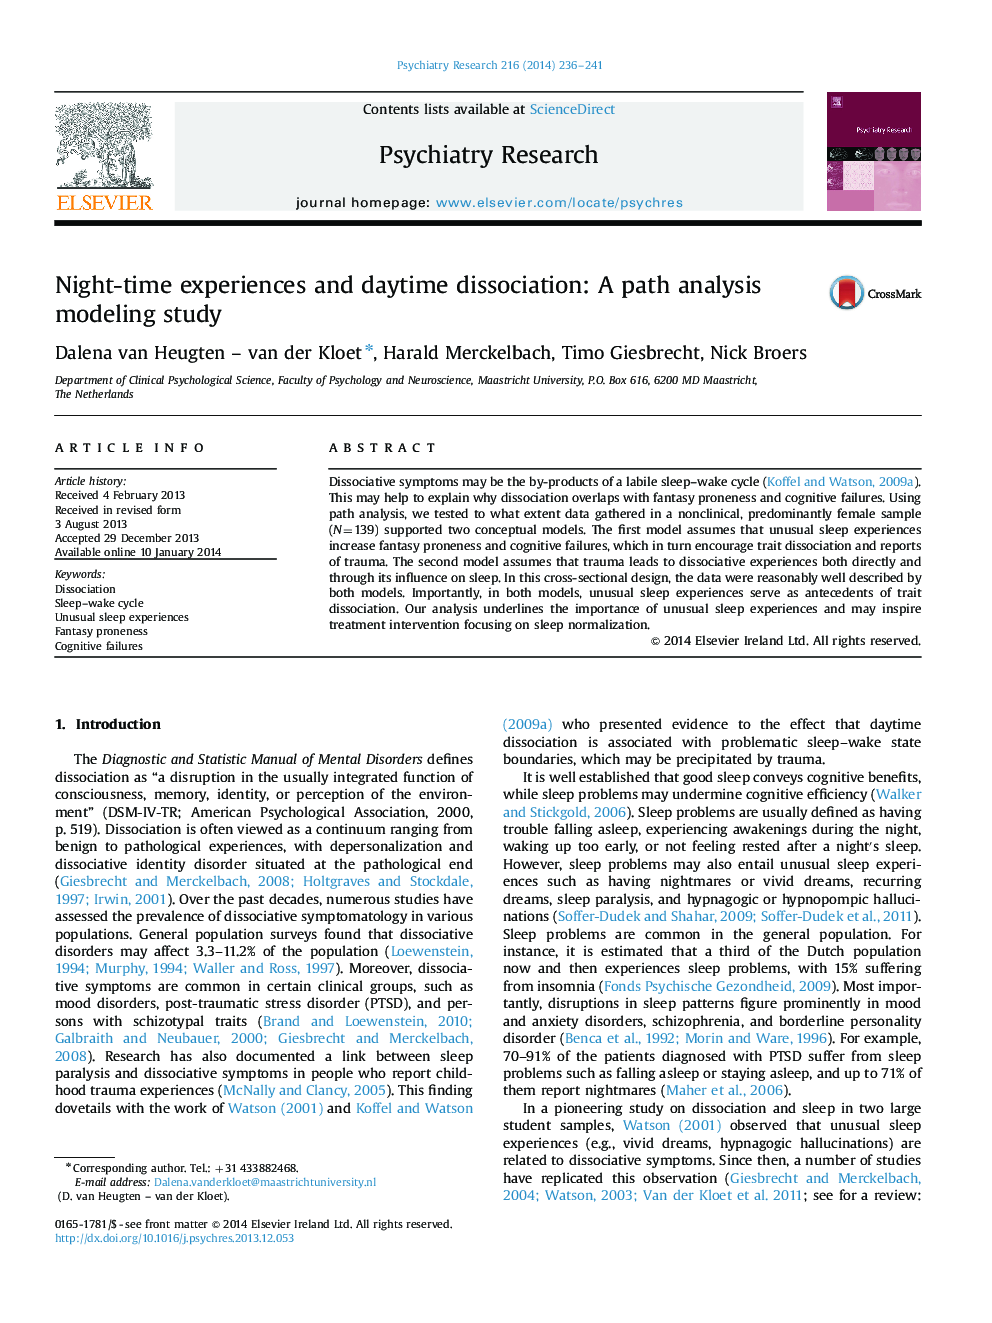 Night-time experiences and daytime dissociation: A path analysis modeling study